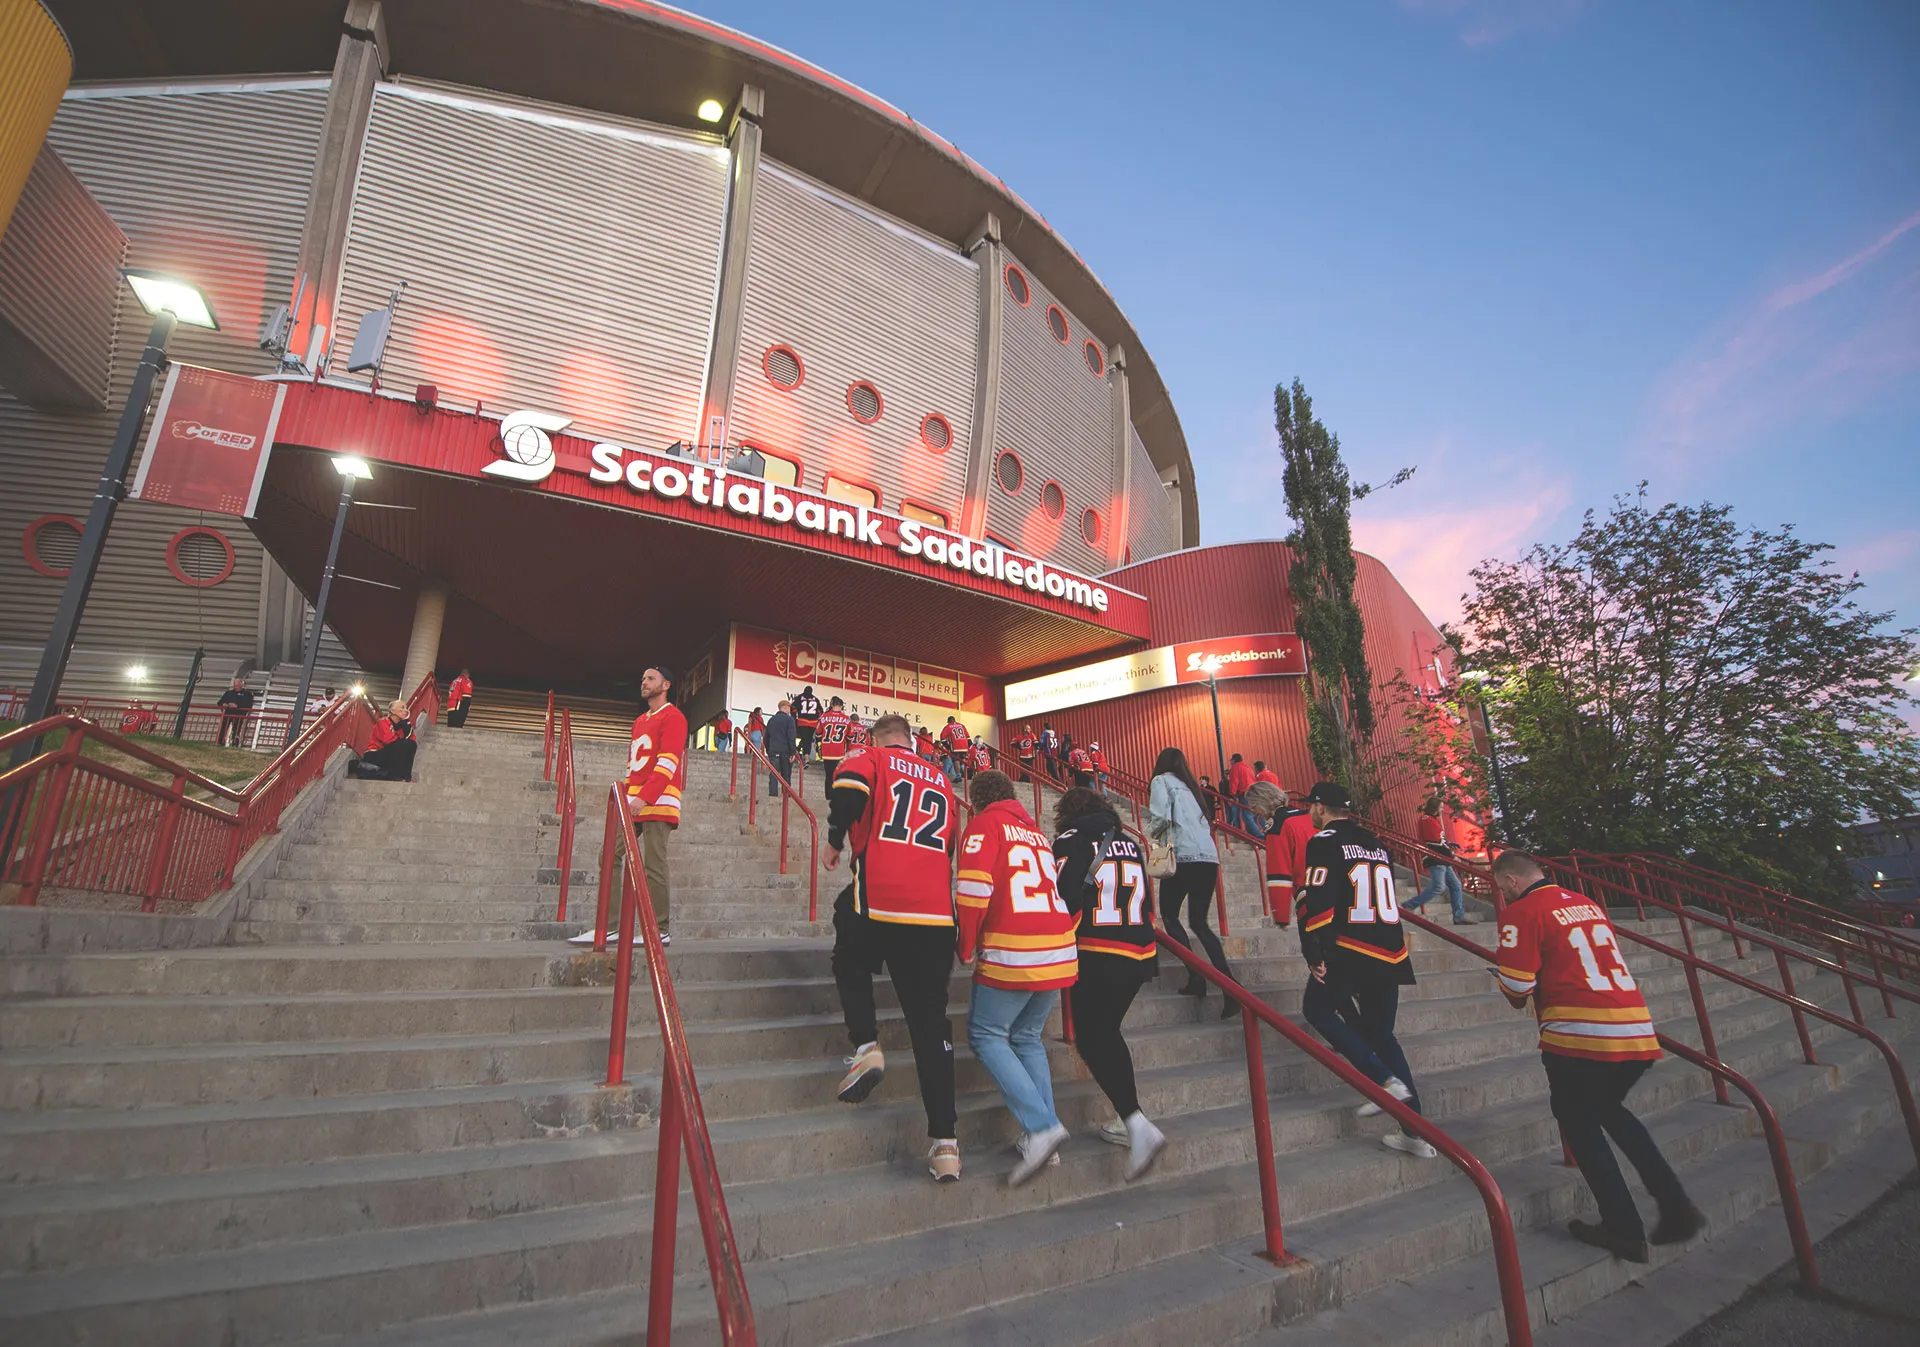 Here's what the Calgary Flames' new arena could look like